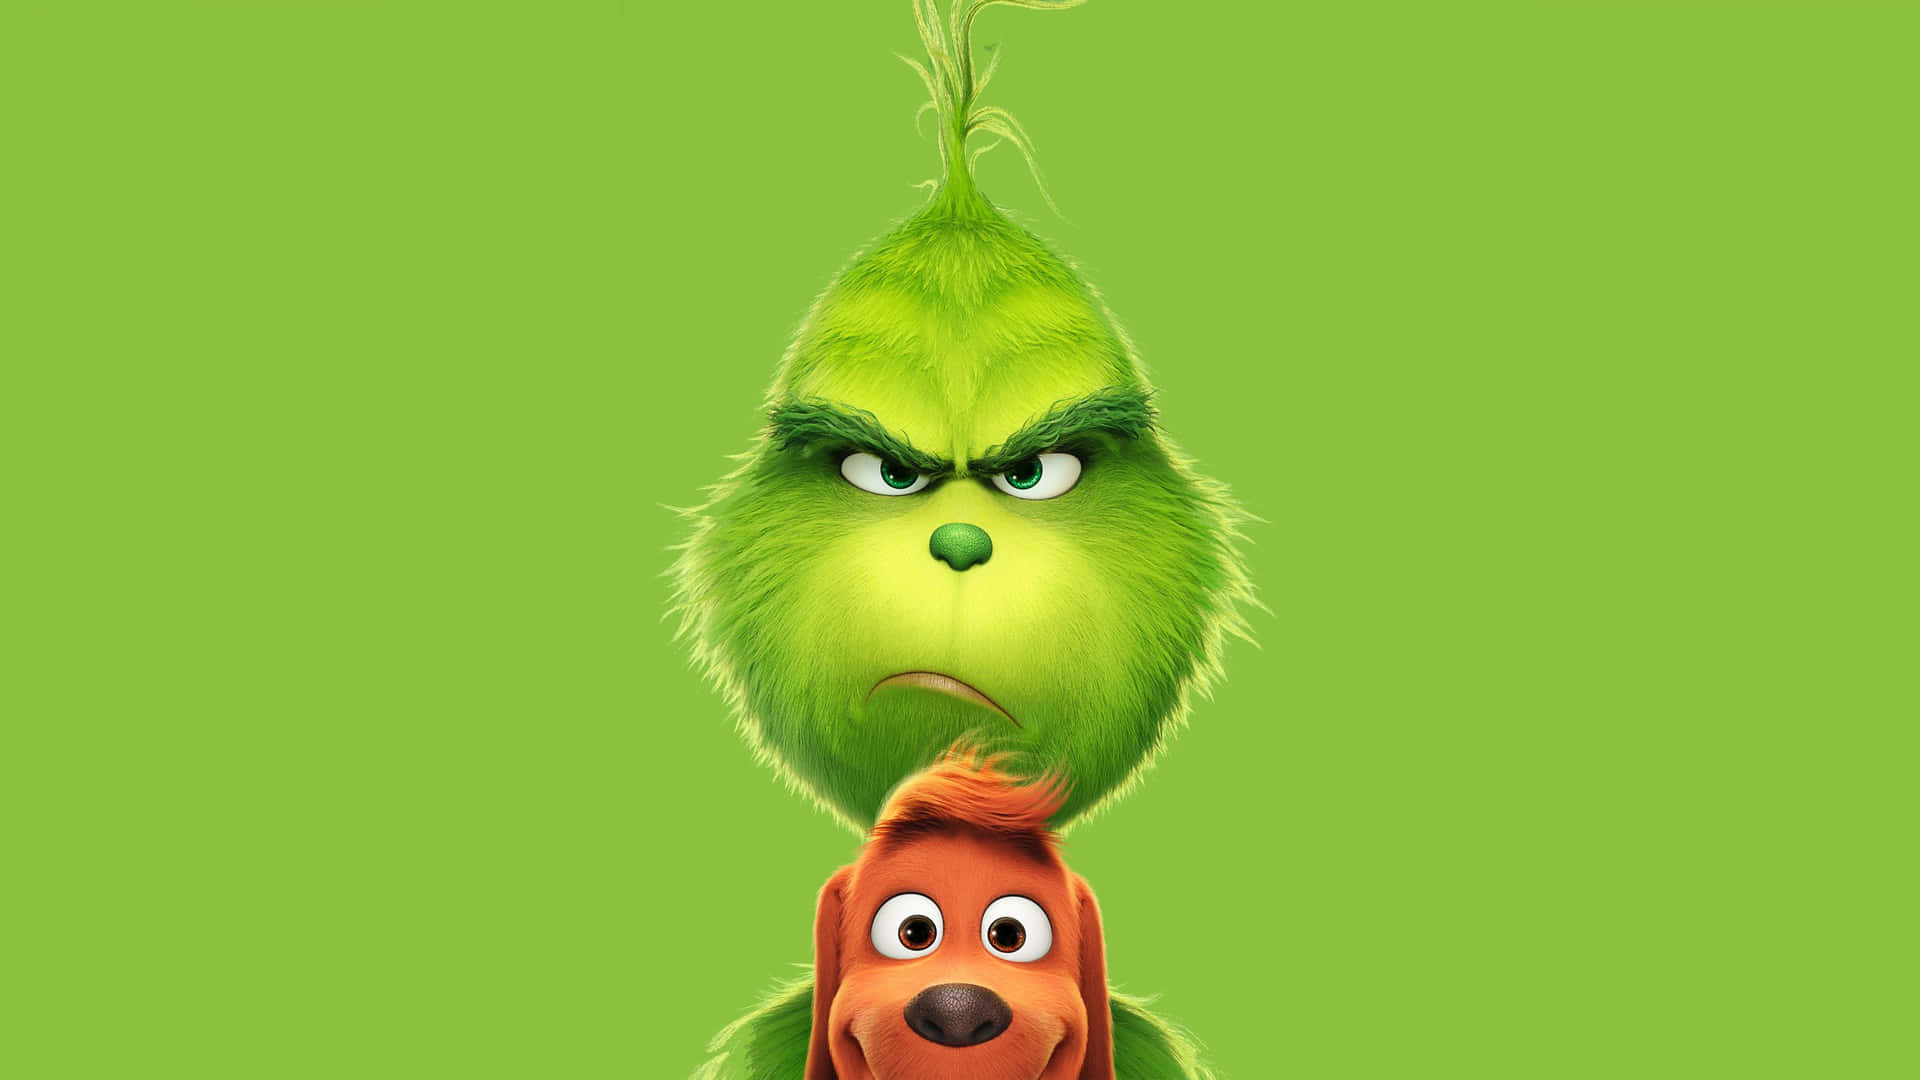 The Grinch Is Ready To Spread Some Christmas Cheer! Background